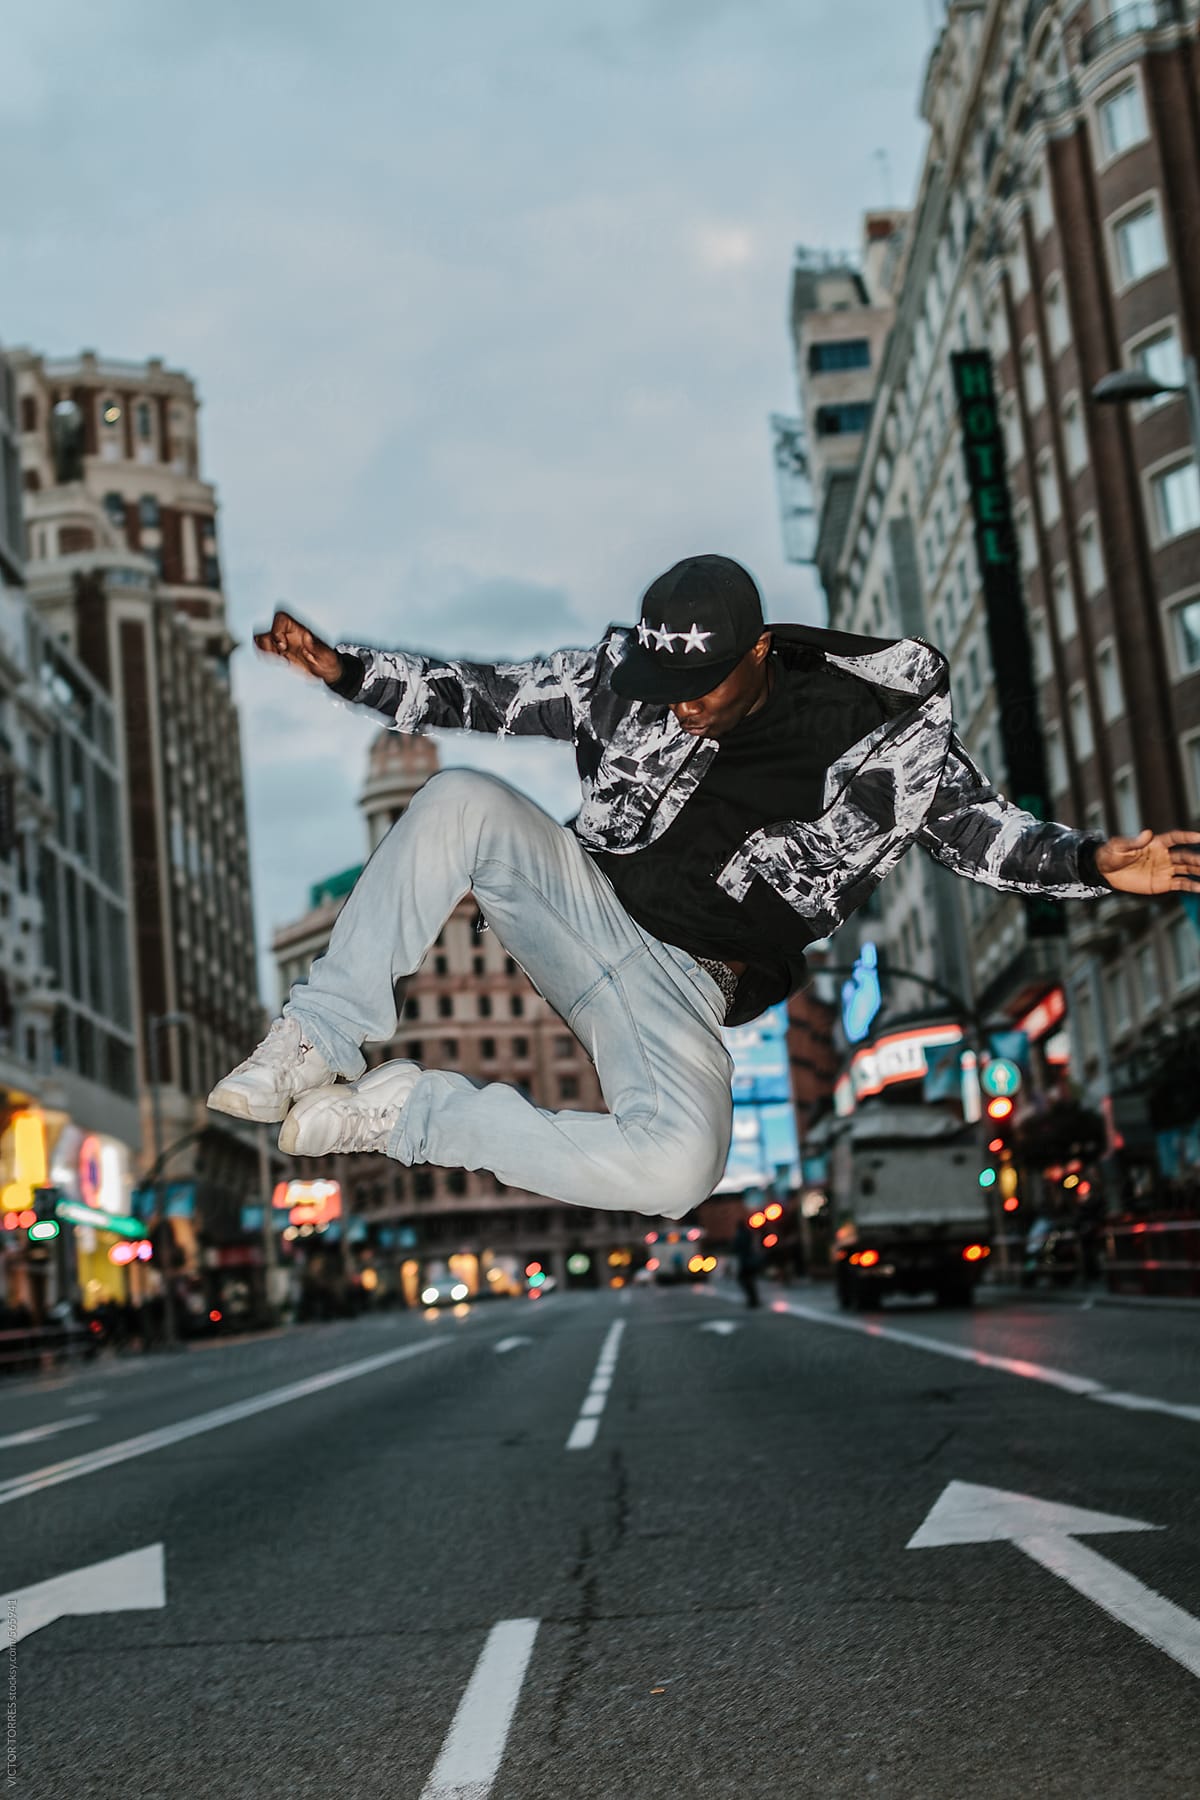 Black Man Jumping in the Middle of an Urban Road